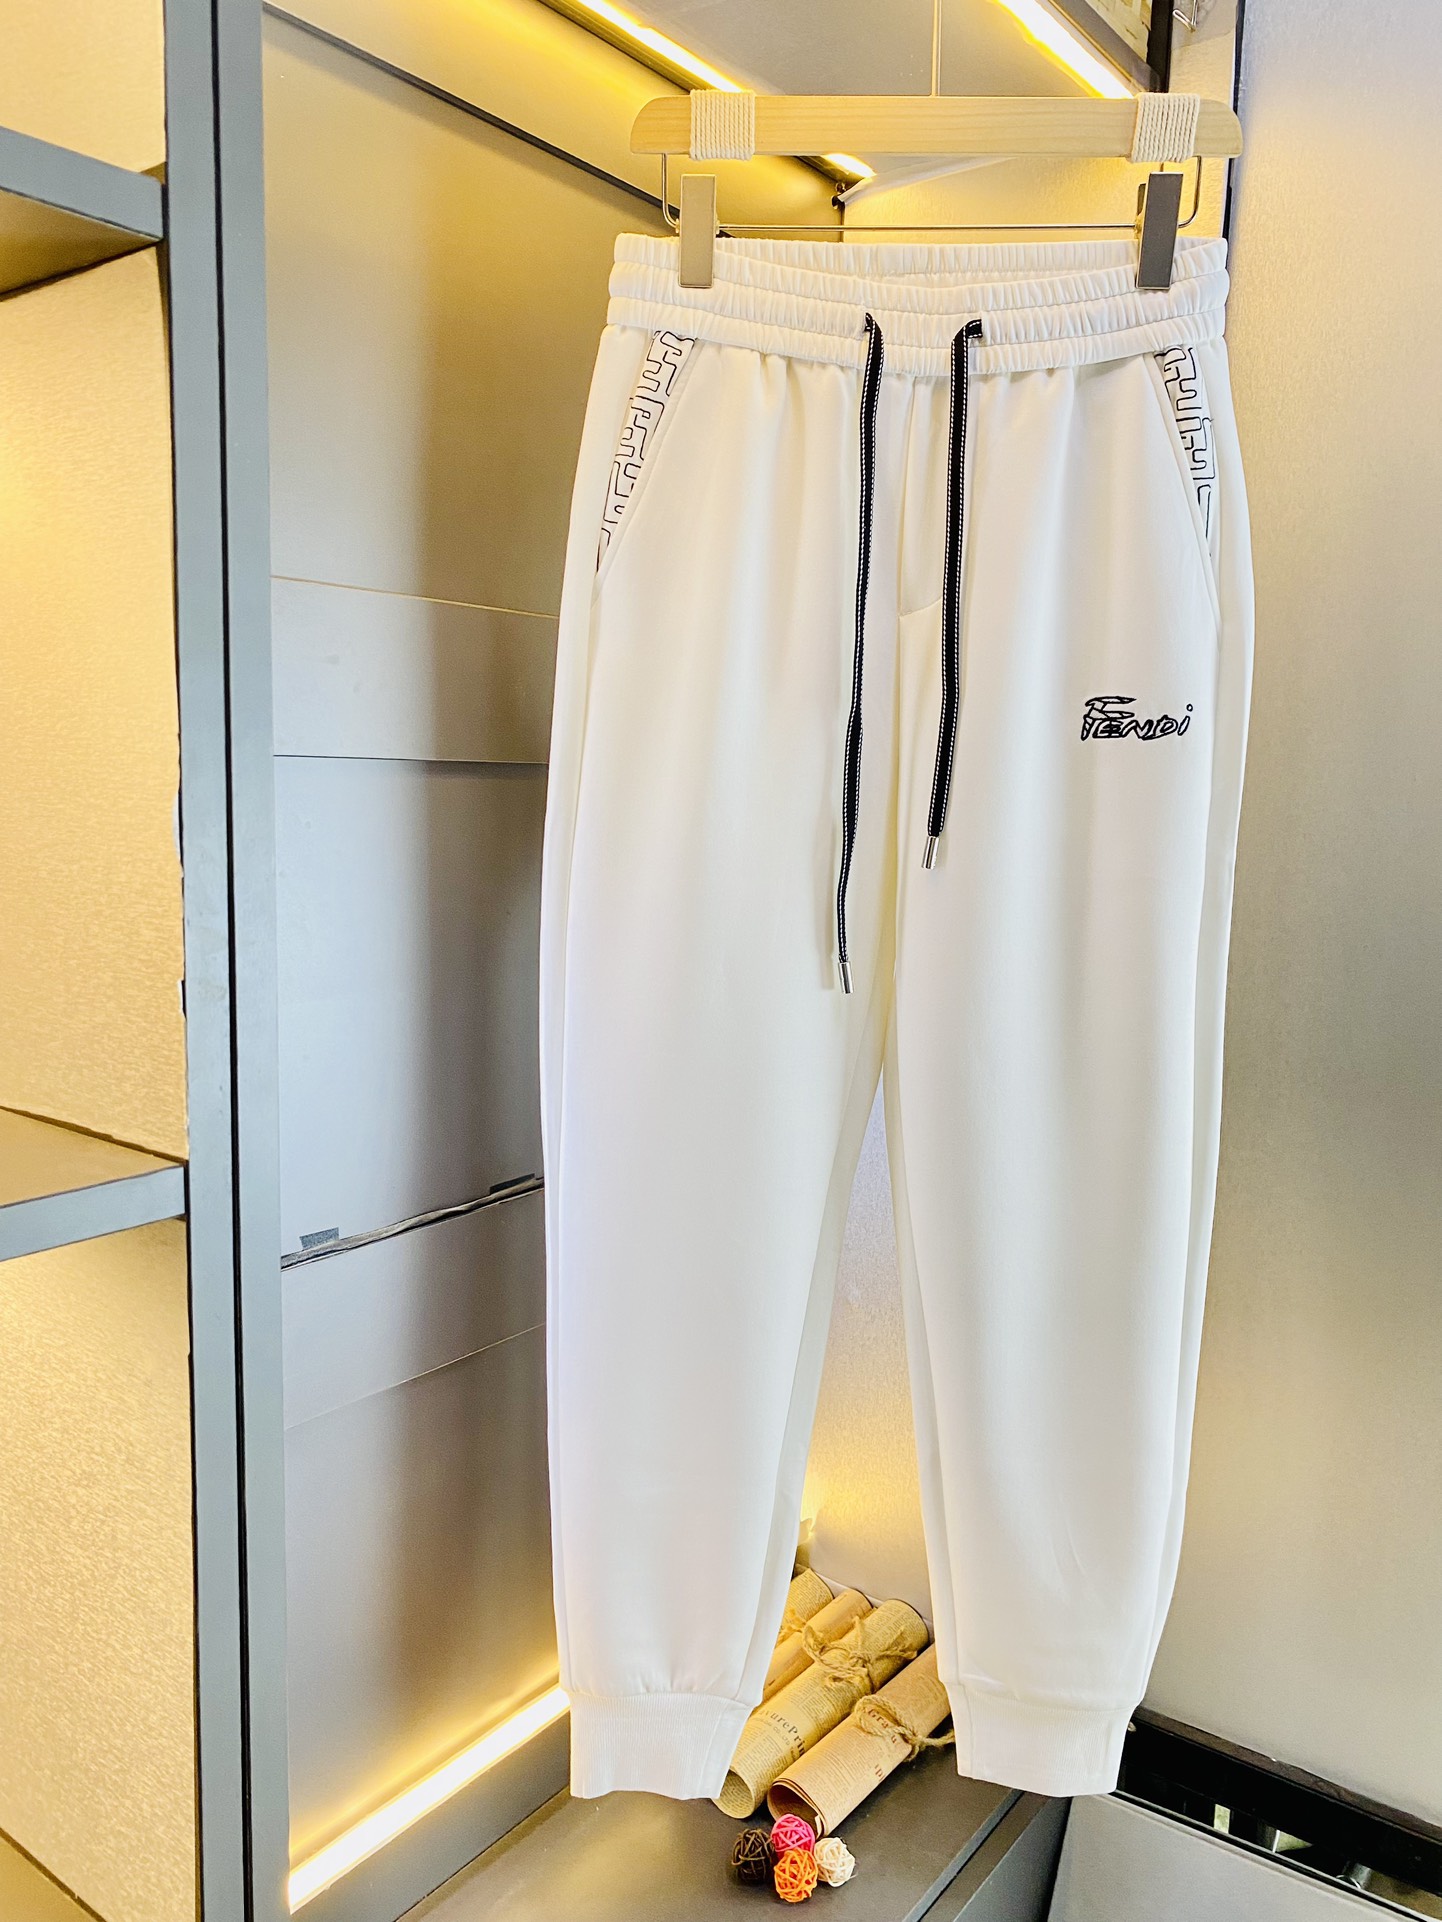 Fendi Clothing Pants & Trousers Fall/Winter Collection Casual